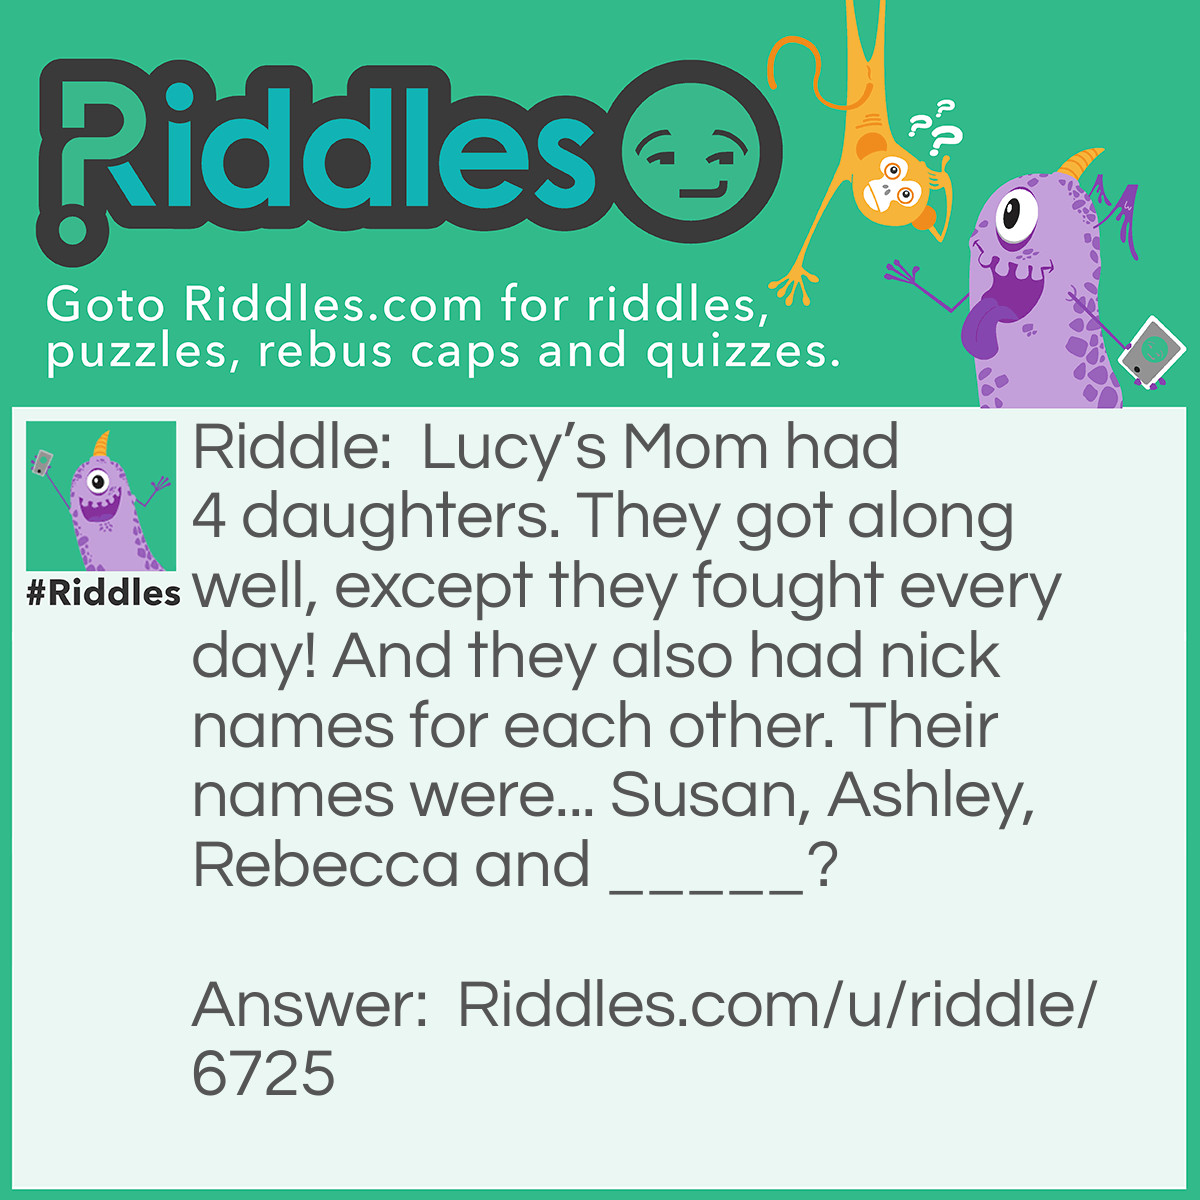 Riddle: Lucy's Mom had 4 daughters. They got along well, except they fought every day! And they also had nick names for each other. Their names were... Susan, Ashley, Rebecca and _____? Answer: Read the beginning again. LUCYS MOM had 4 daughters. Lucy is the 4th daughter!!!